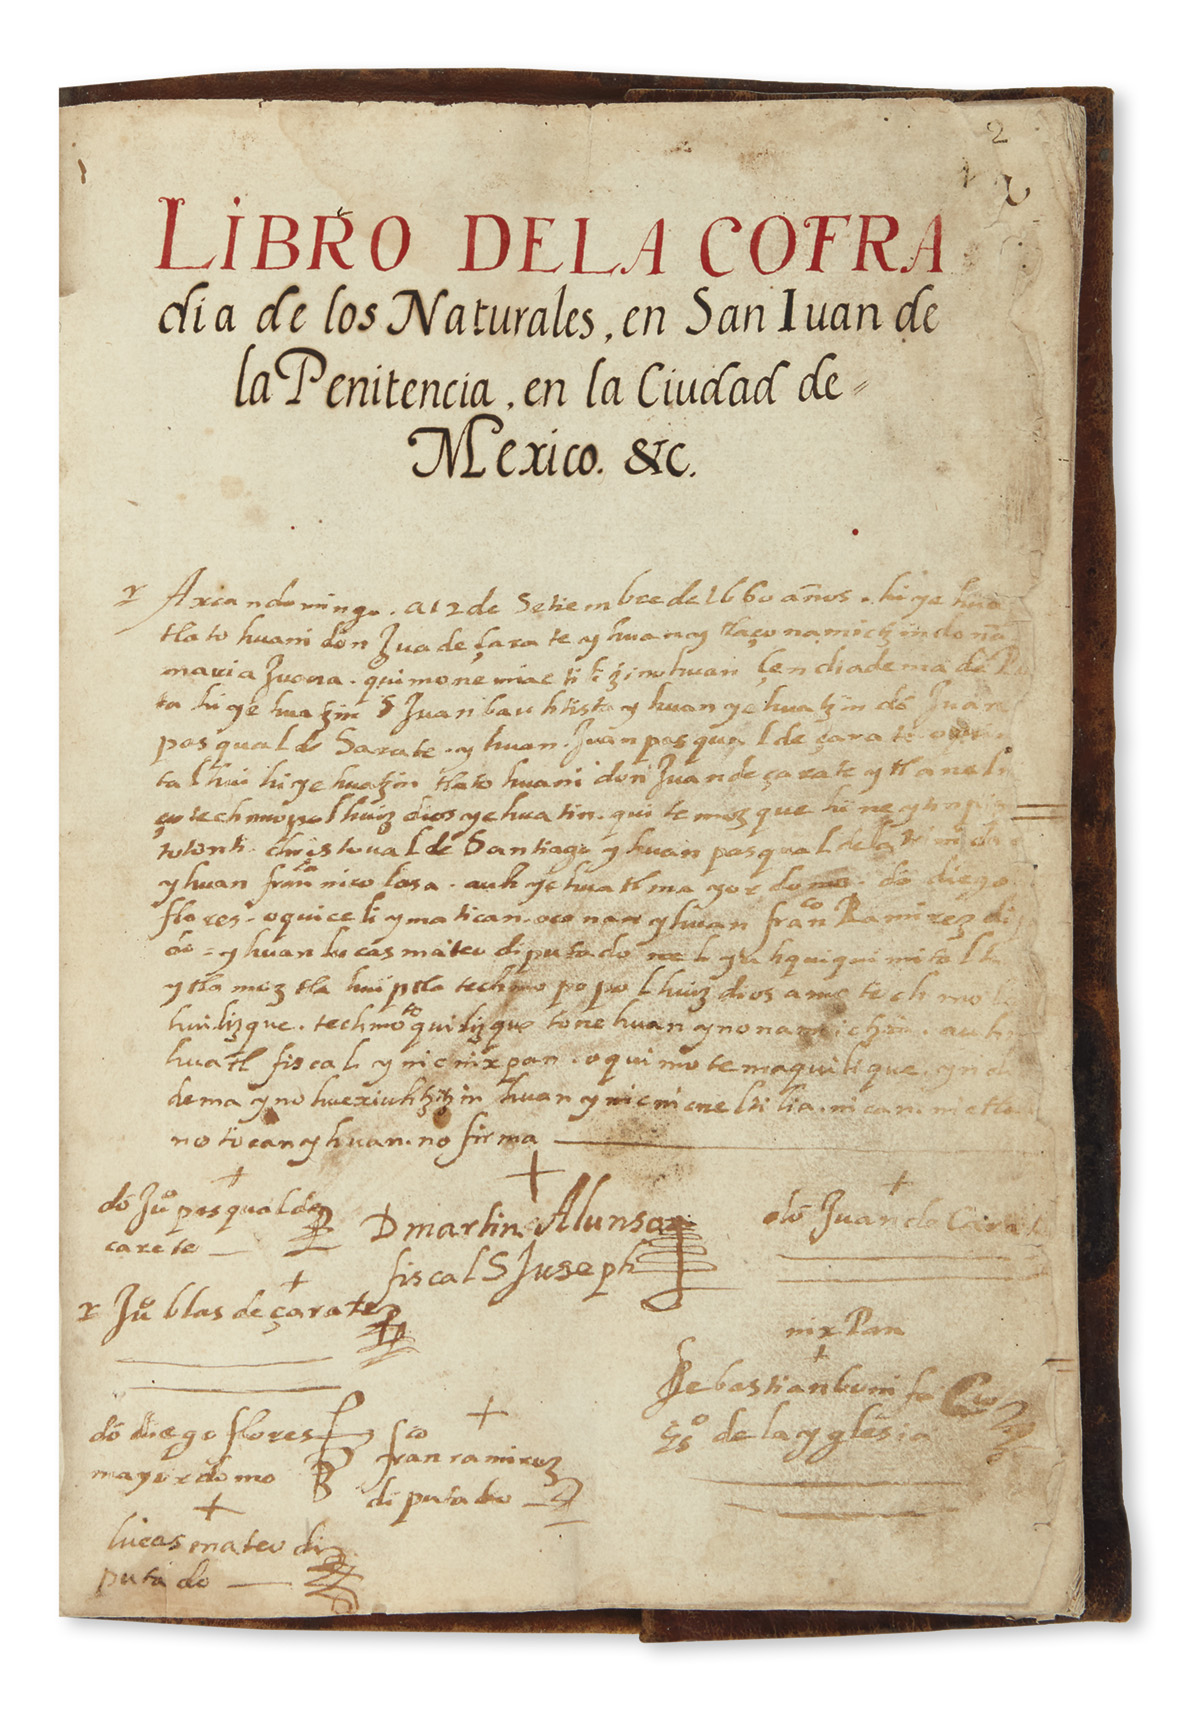 (MEXICAN MANUSCRIPTS.) Record book and constitution of an Indian cofradía in Mexico City.